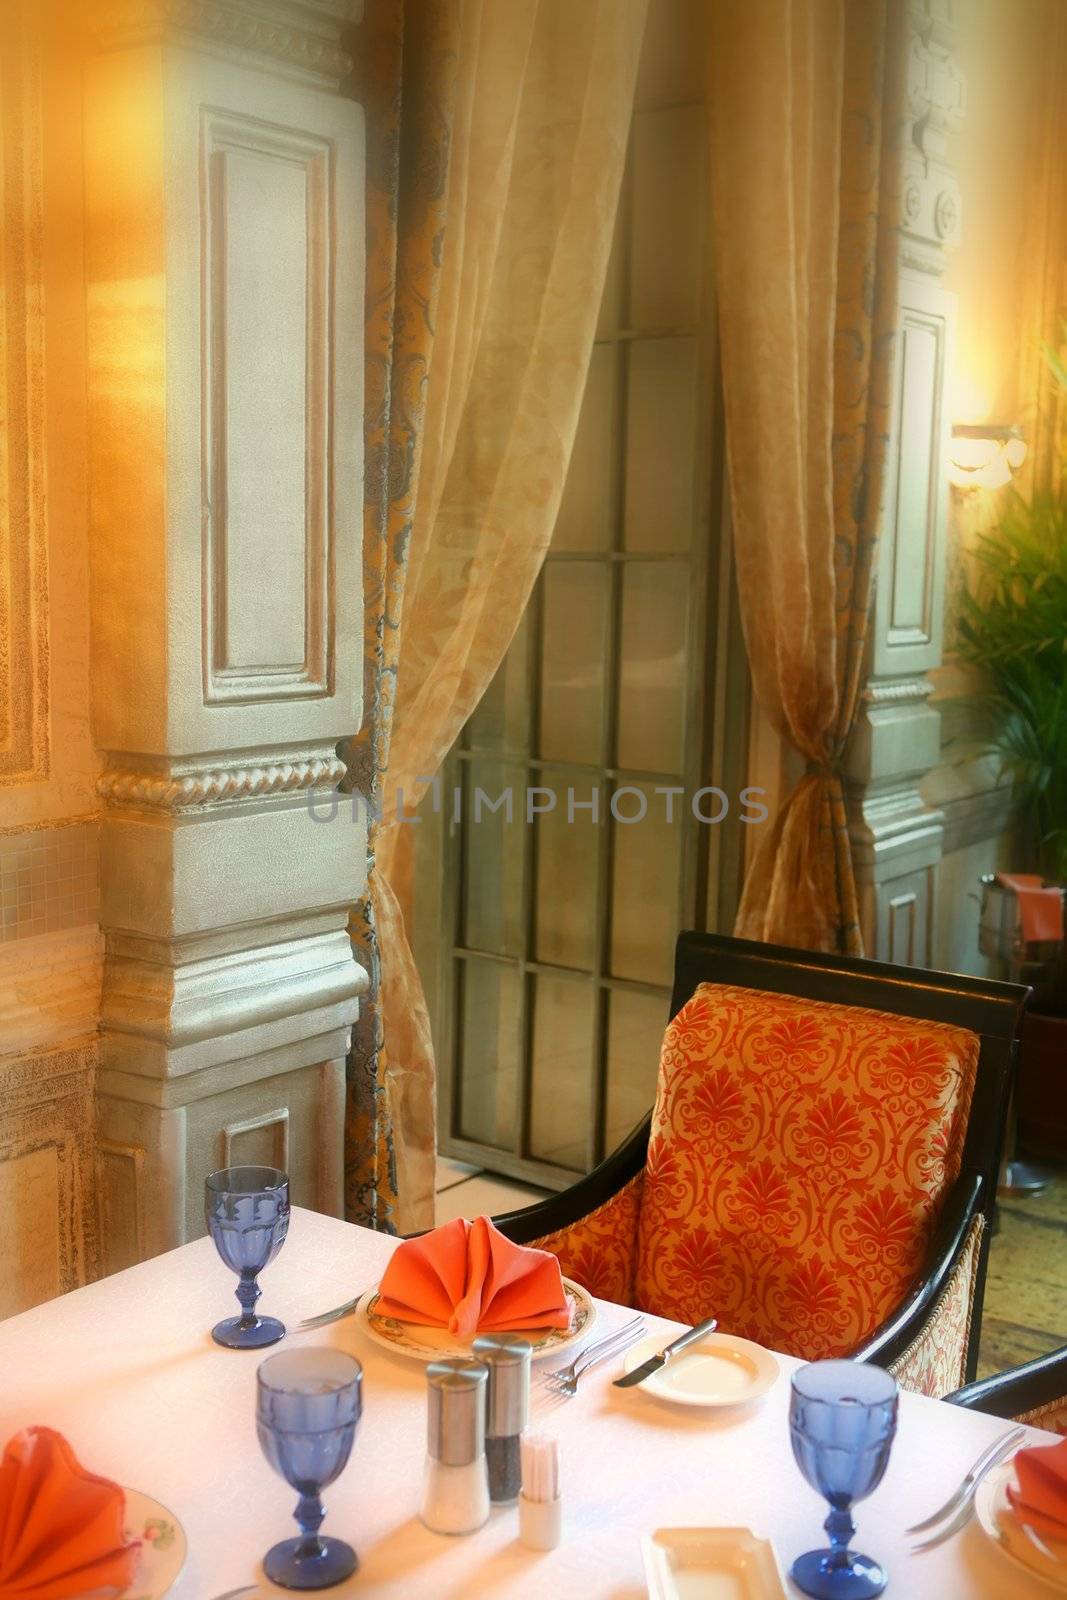 Interior of the Dining Room in Romantic Style